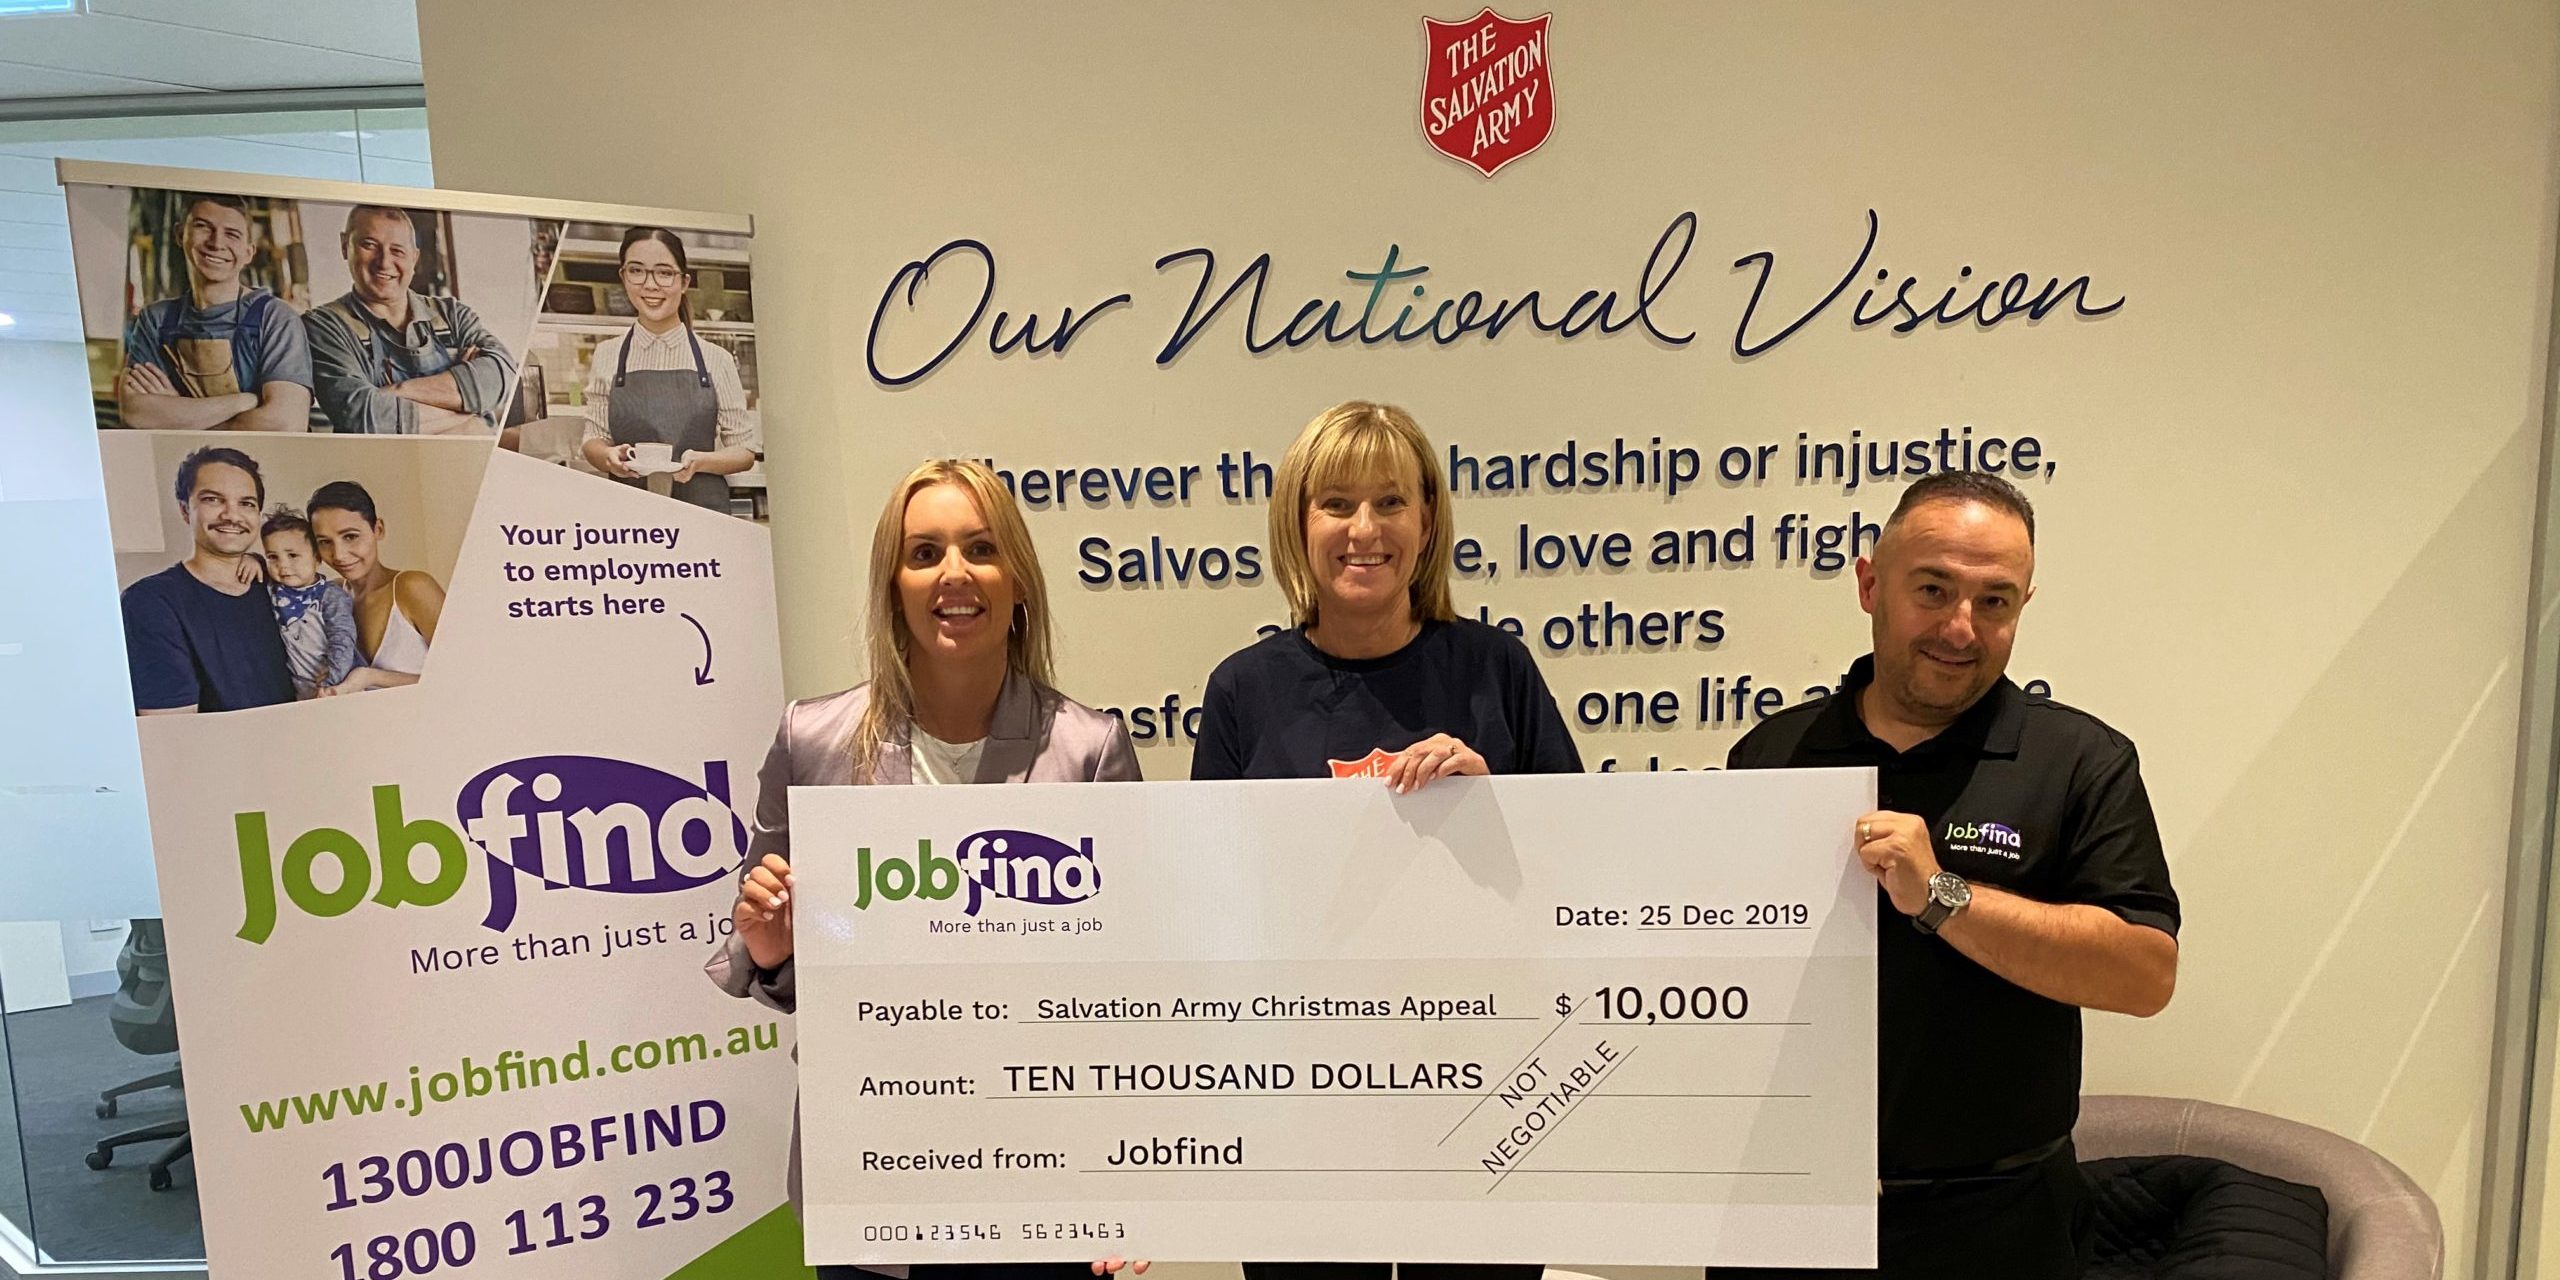 Salvation Army Cheque - image of Jobfind staff holding oversized cheque made out to Salvation Army Christmas Appeal